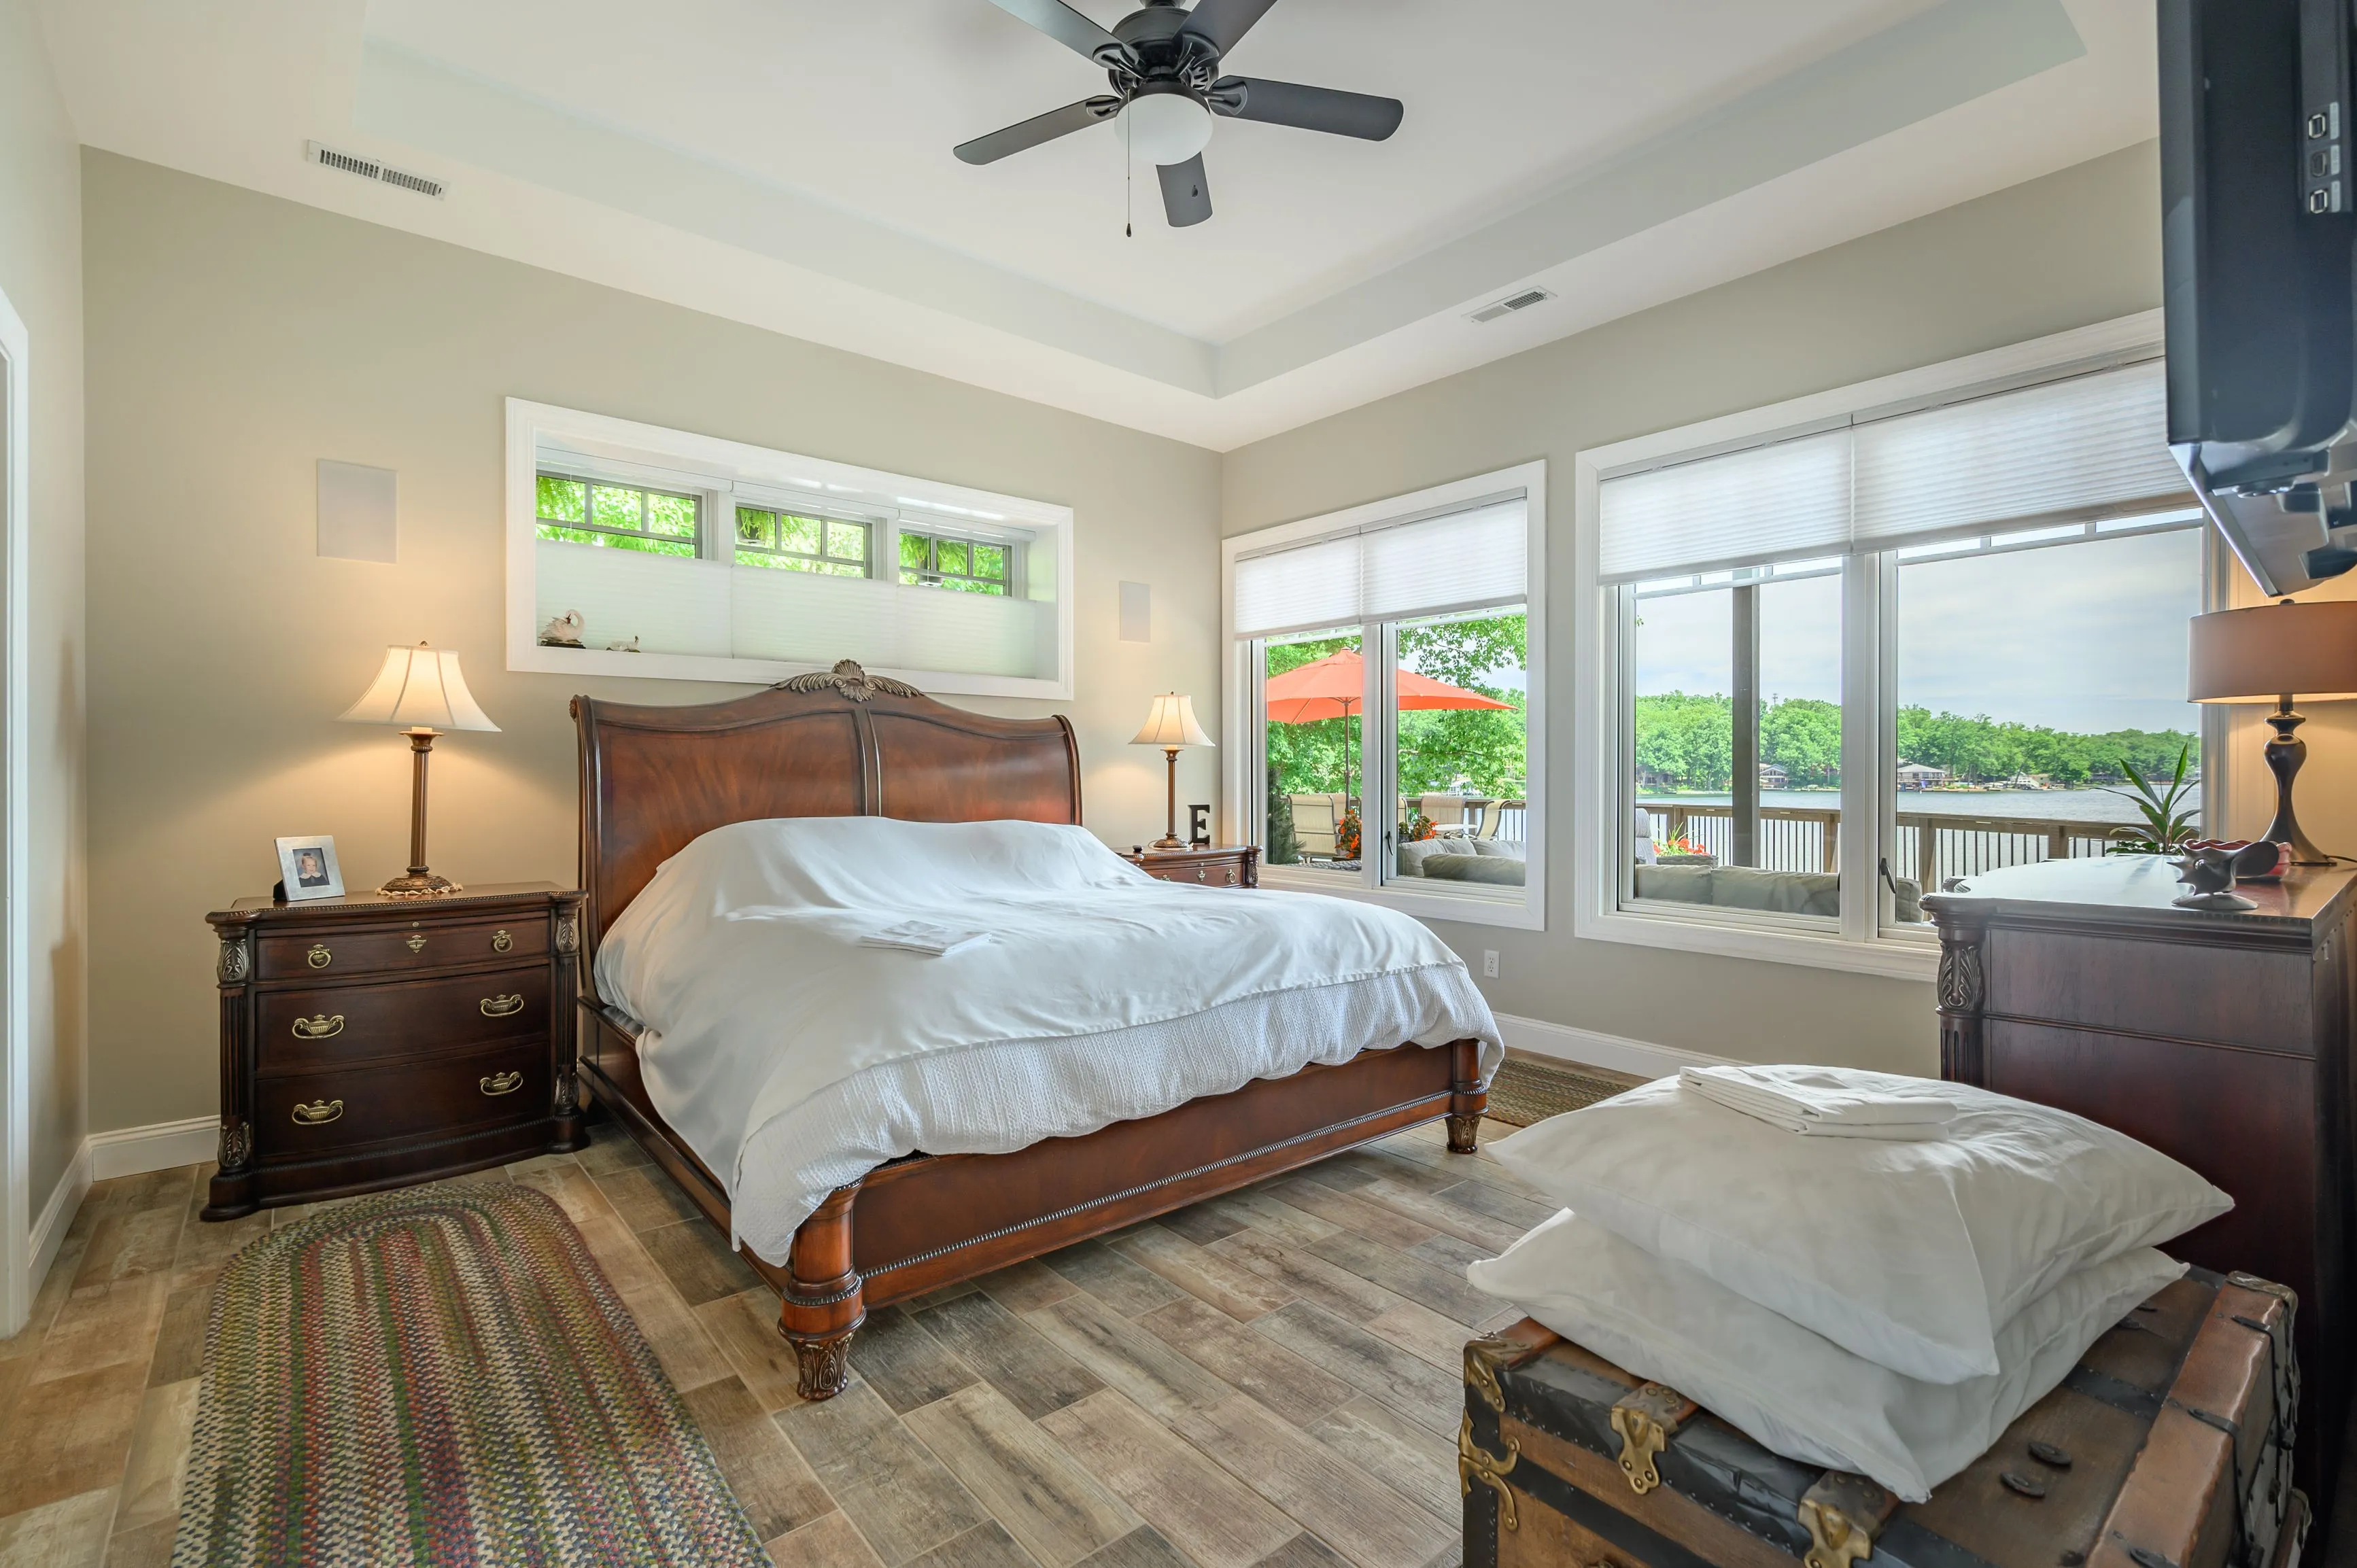 Bright and airy bedroom with a queen-sized bed, wooden furniture, ceiling fan, and large windows showing greenery outside.